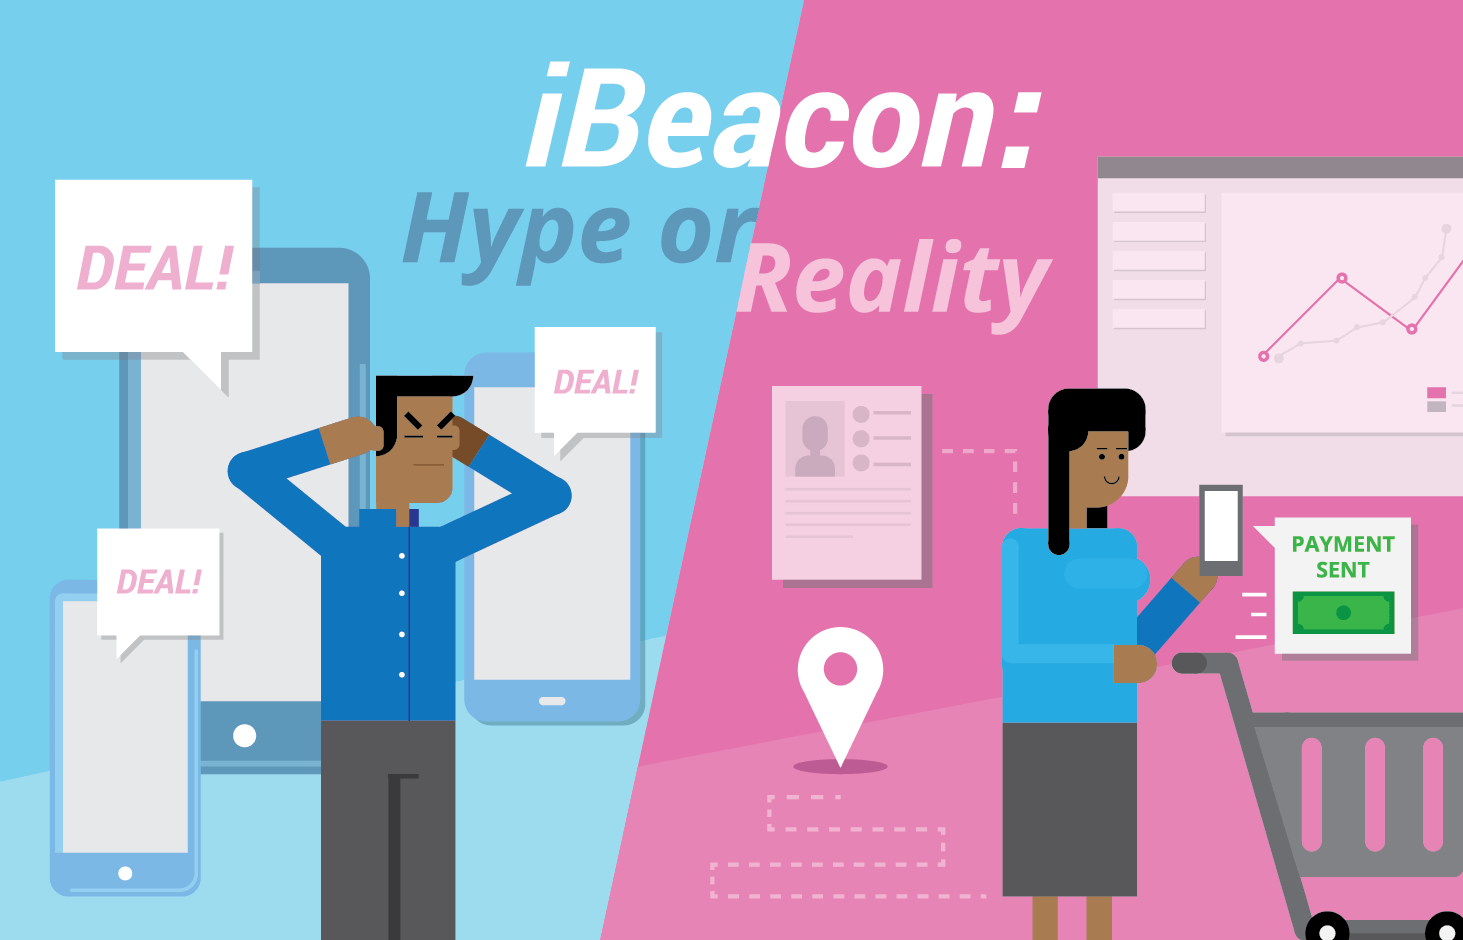 ibeacon-revolution-real-or-hype